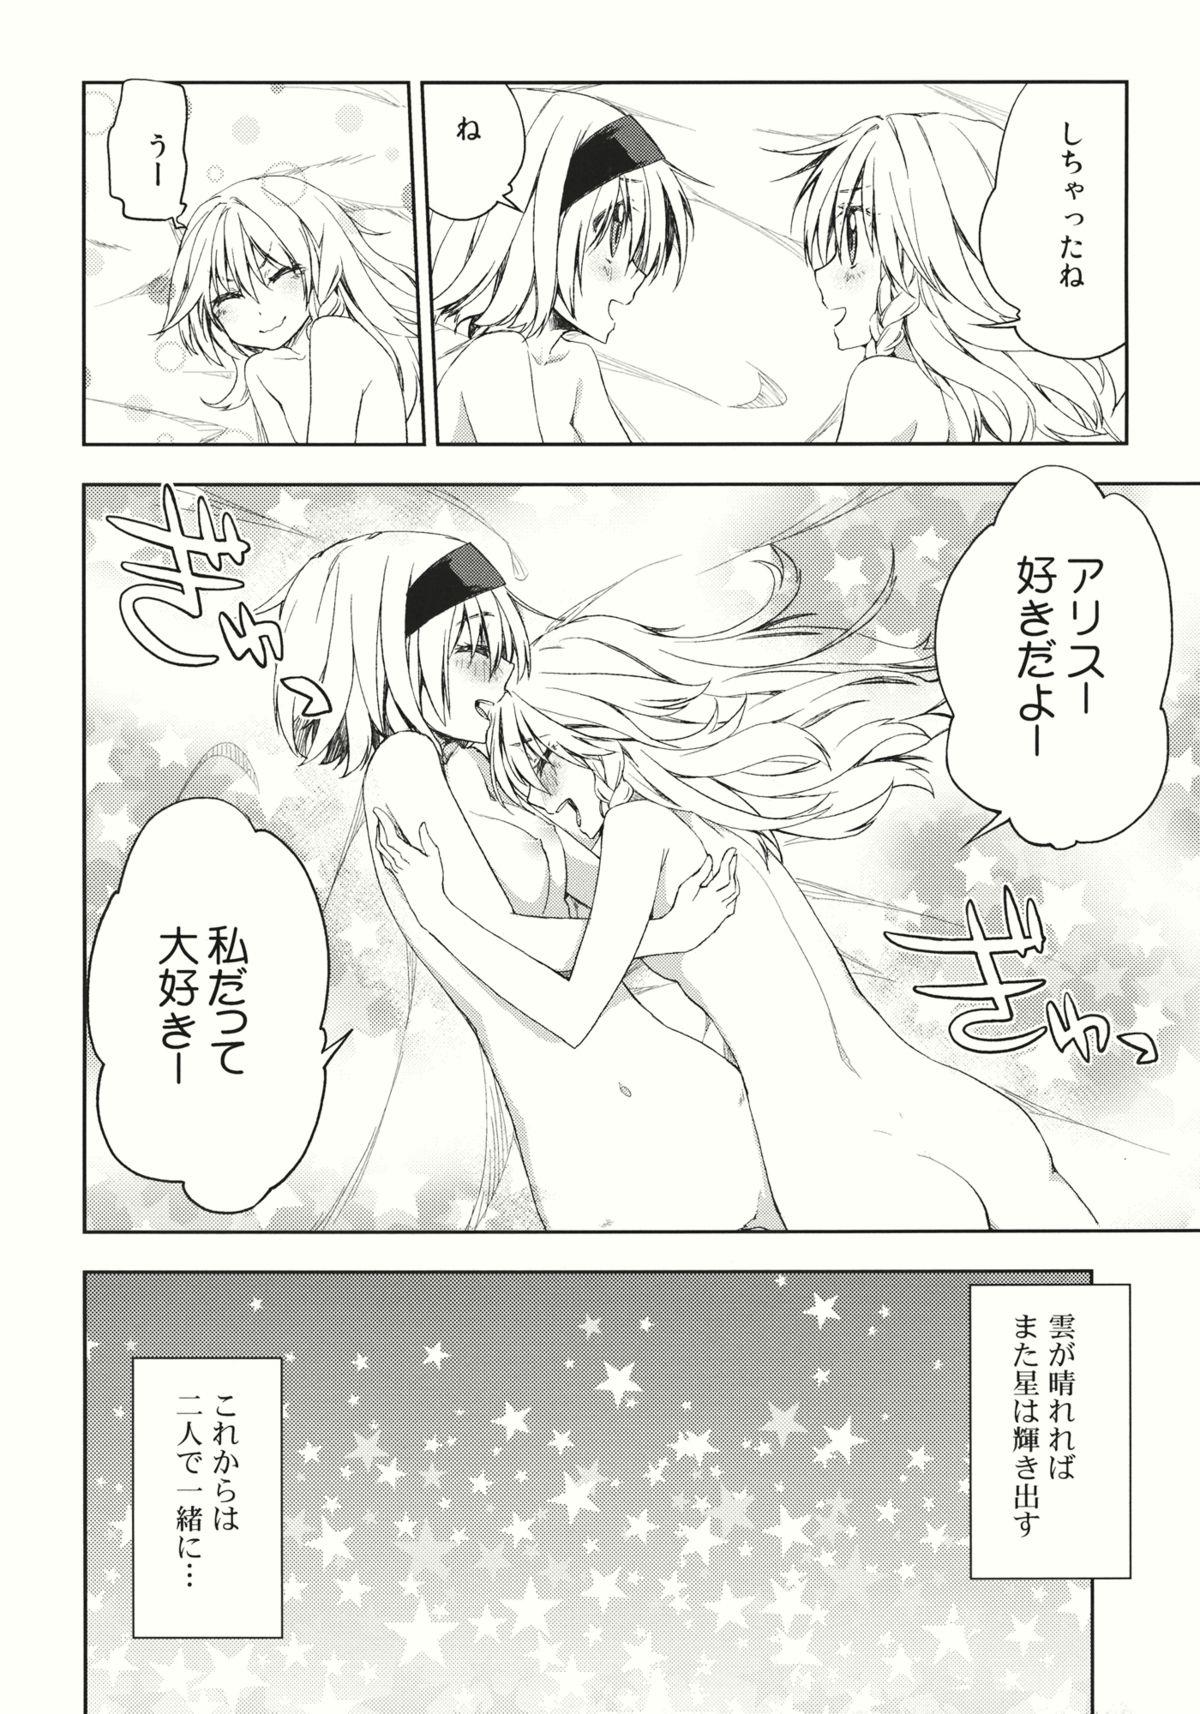 Flashing twinkle star - Touhou project Cock Sucking - Page 24